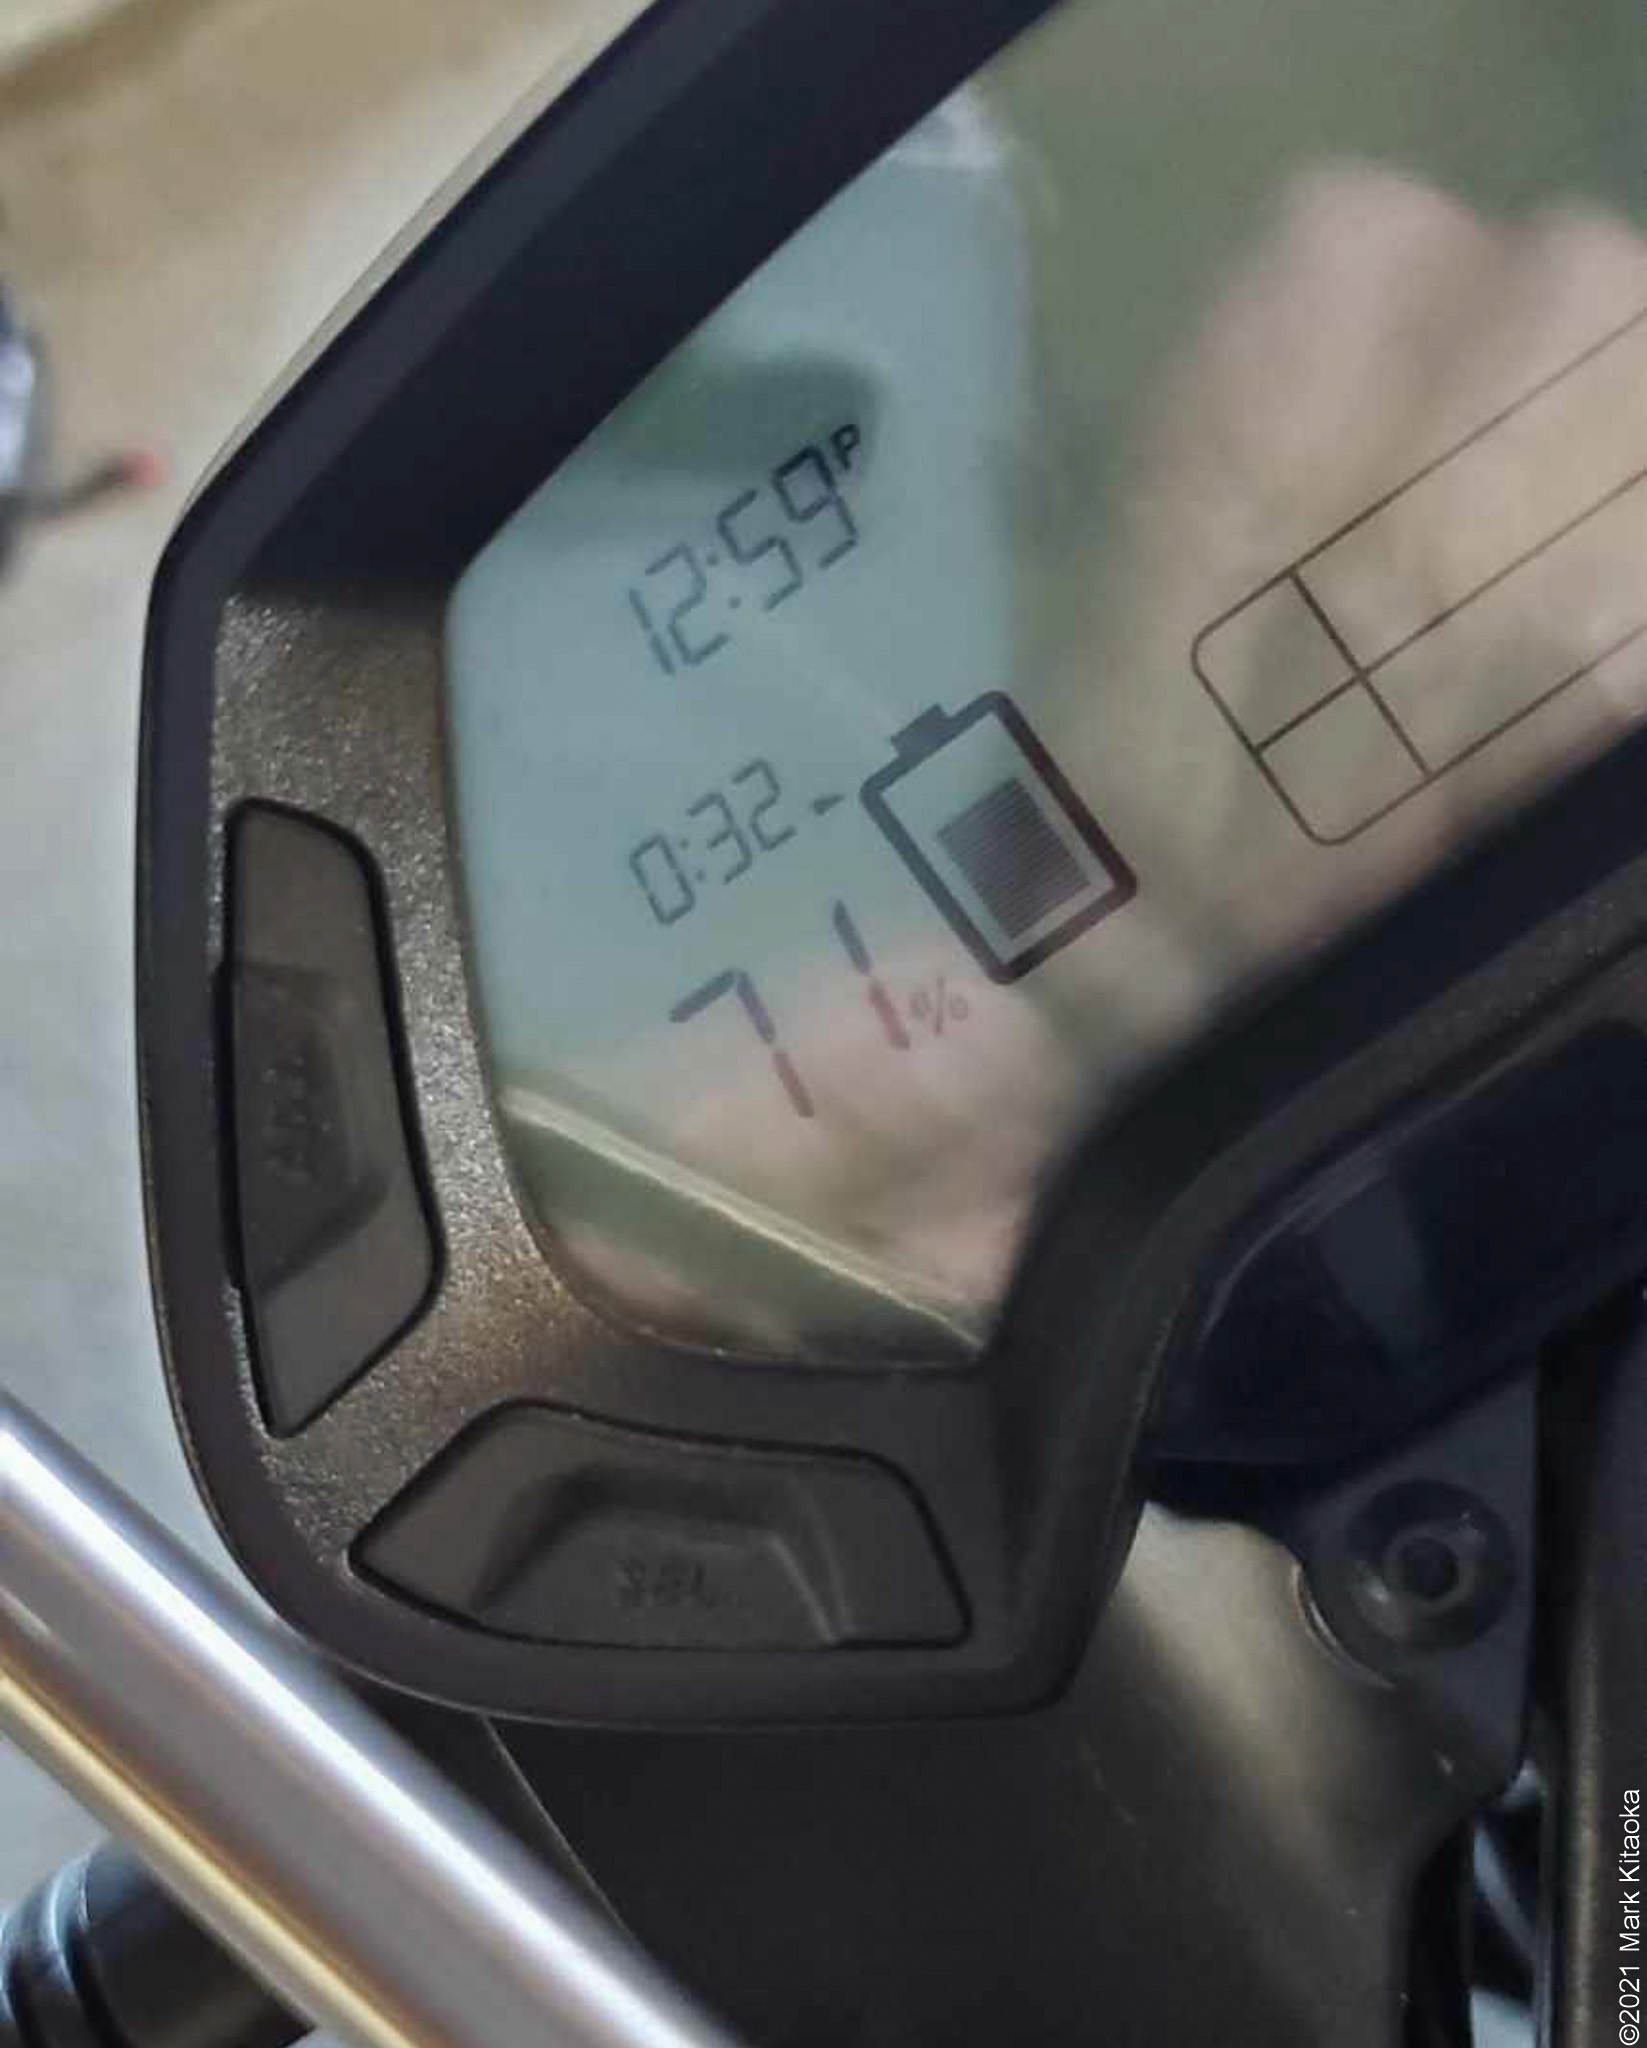 DSR Dash indicator showing remaining battery charge